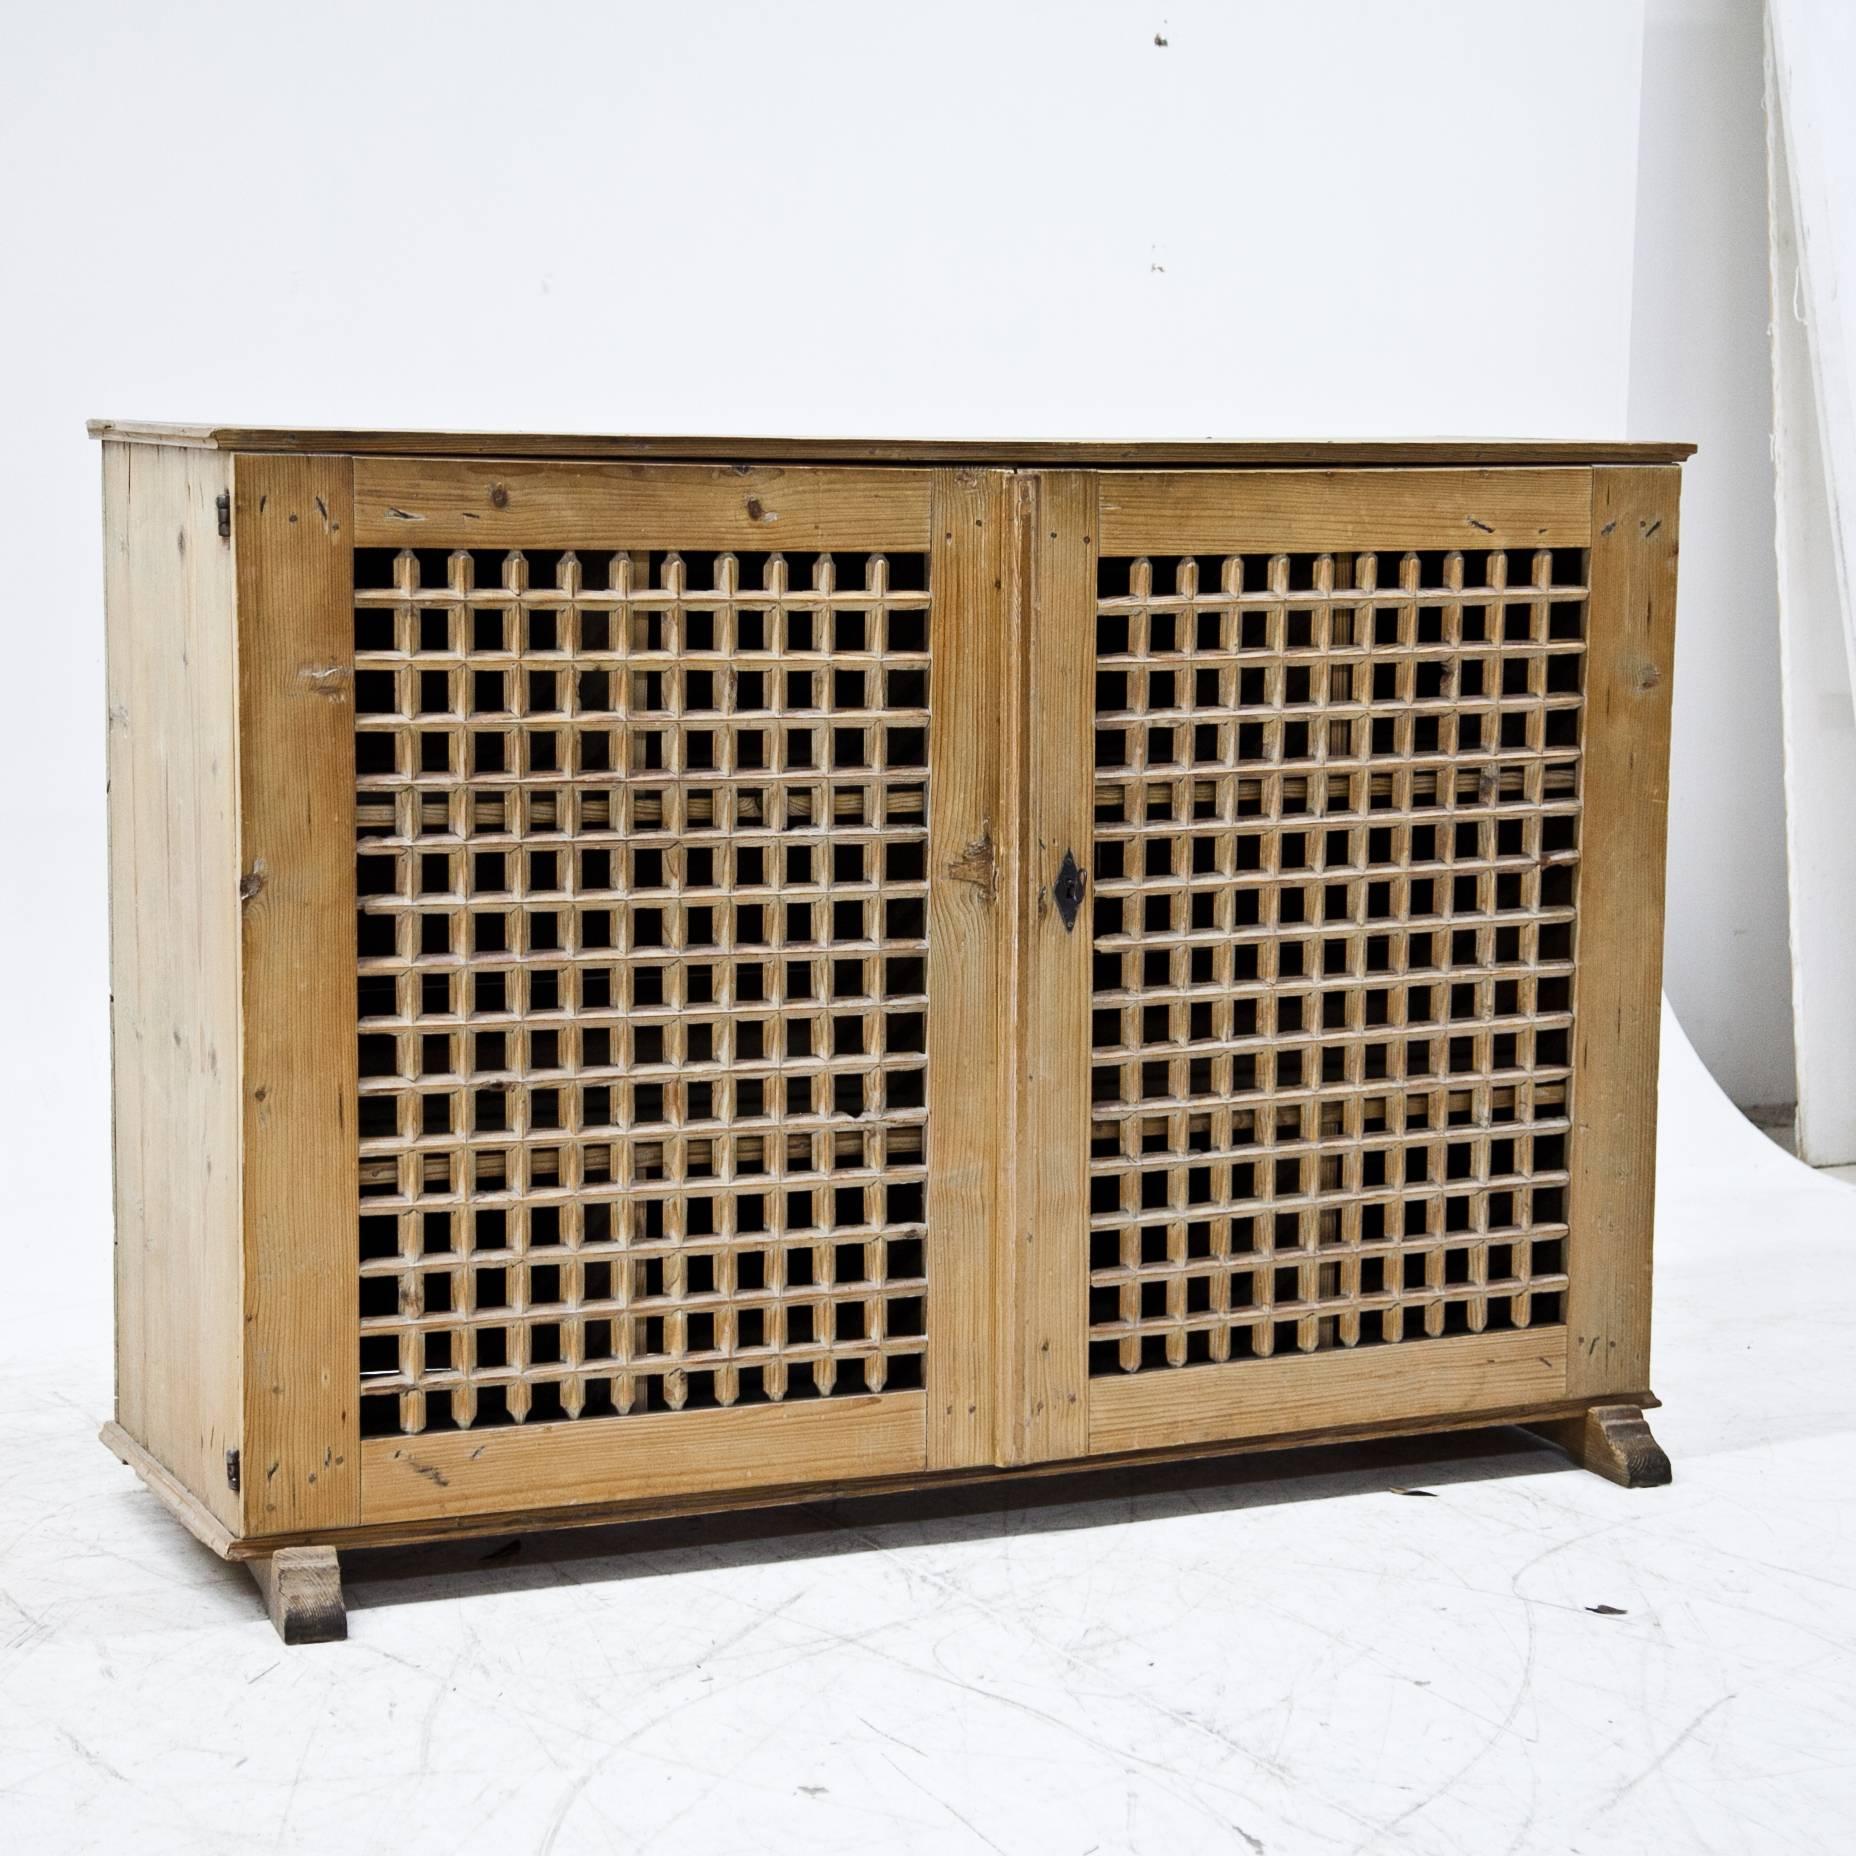 Two-doored wine rack with bars structure, out of natural pinewood with iron fittings. The legs were replaced.